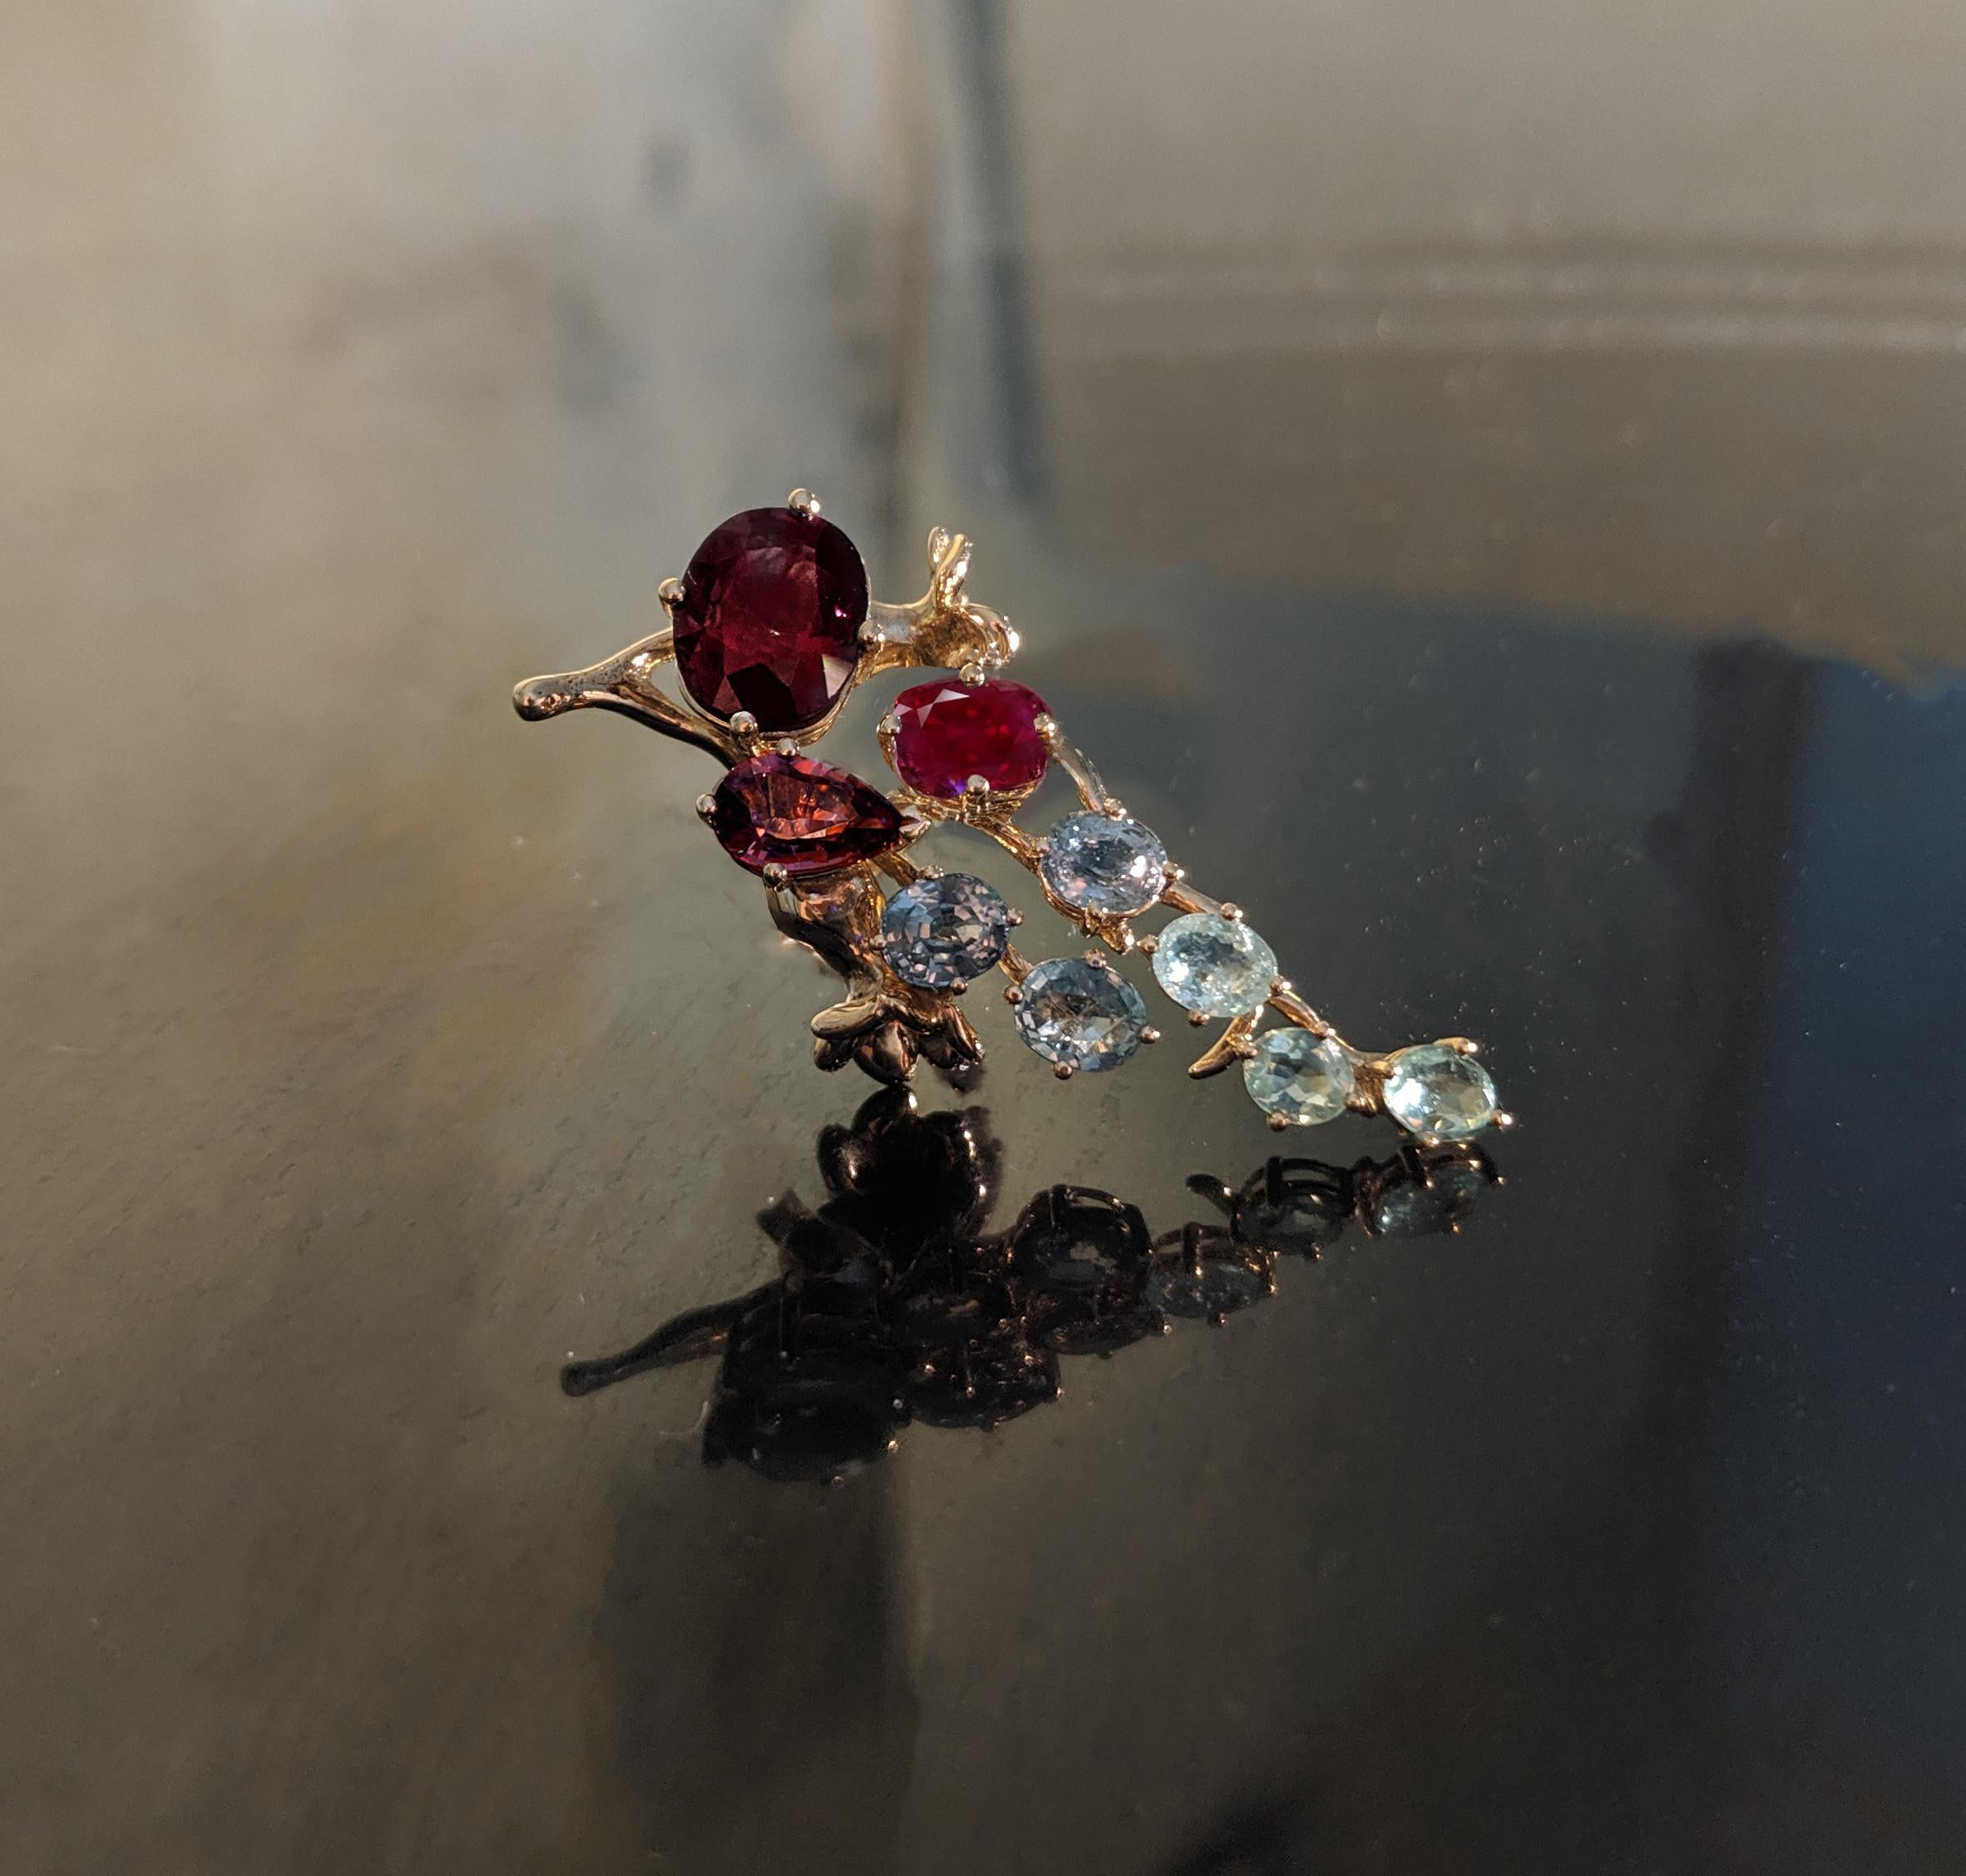 This Tobacco Flower brooch is made of 18 karat rose gold and features a stunning array of natural gems including:

Oval ruby 4.27 carats, dimensions: 11.16x9.36 mm
Oval ruby 0.98 carats, 7x5.5 mm
Oval ruby with a warmer tone, 1.01 carats, 6.5x6